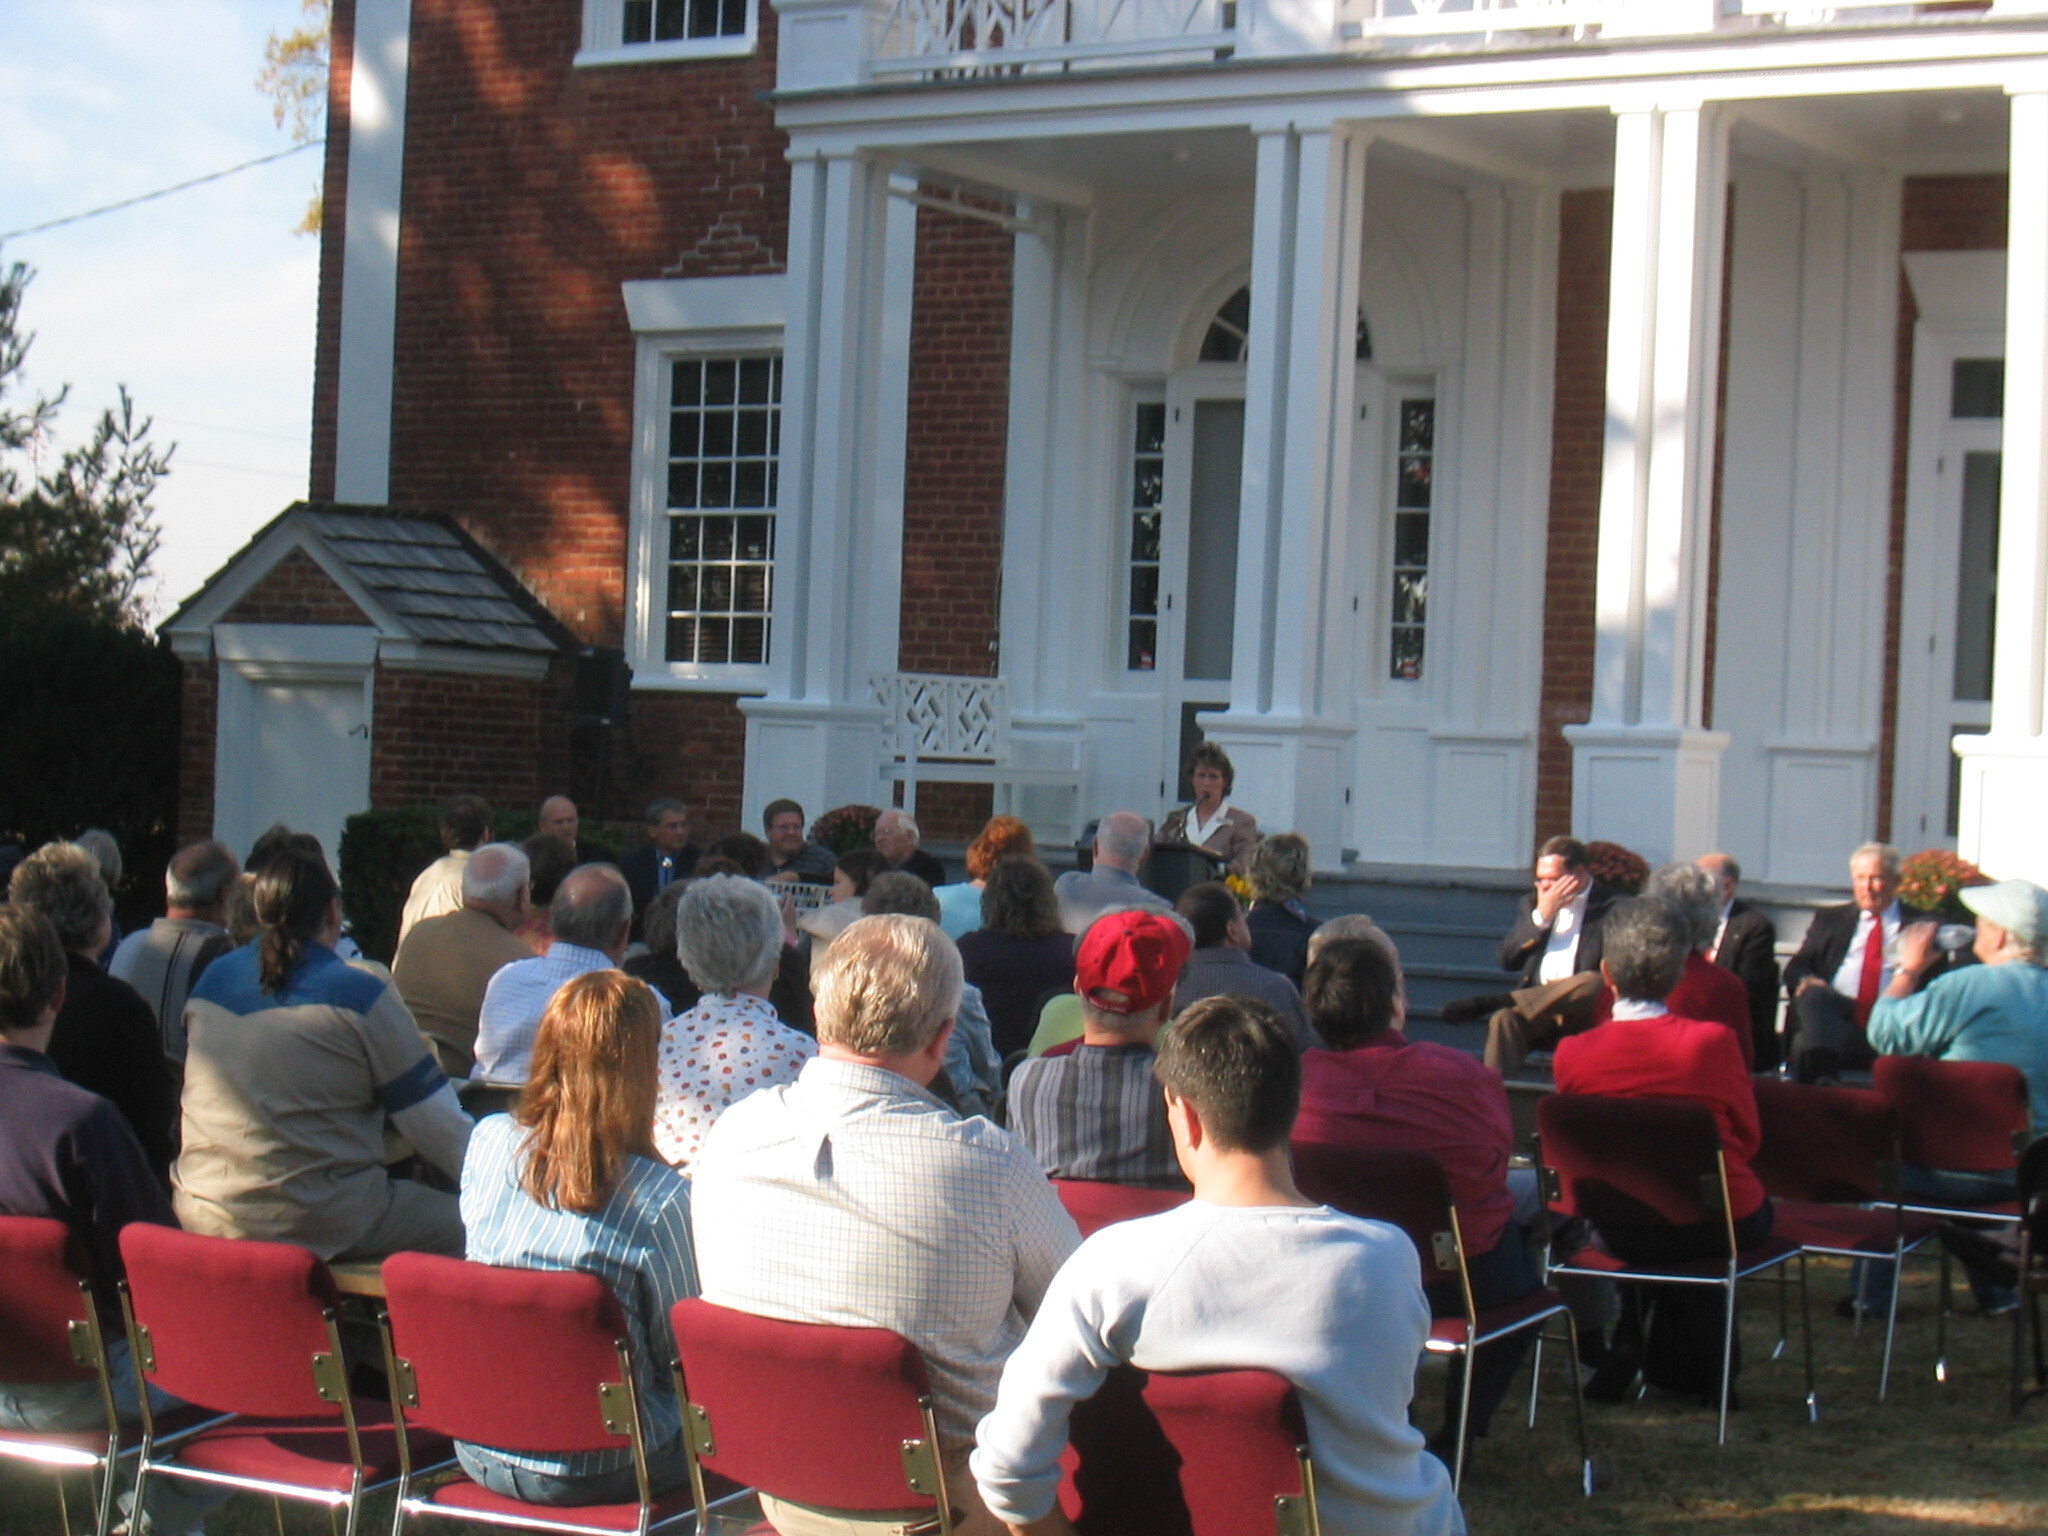 A speaker gives an address at the Trust for Public Land, land acquisition dedication at the Chief Vann House Historic Site near Chatsworth, Georgia